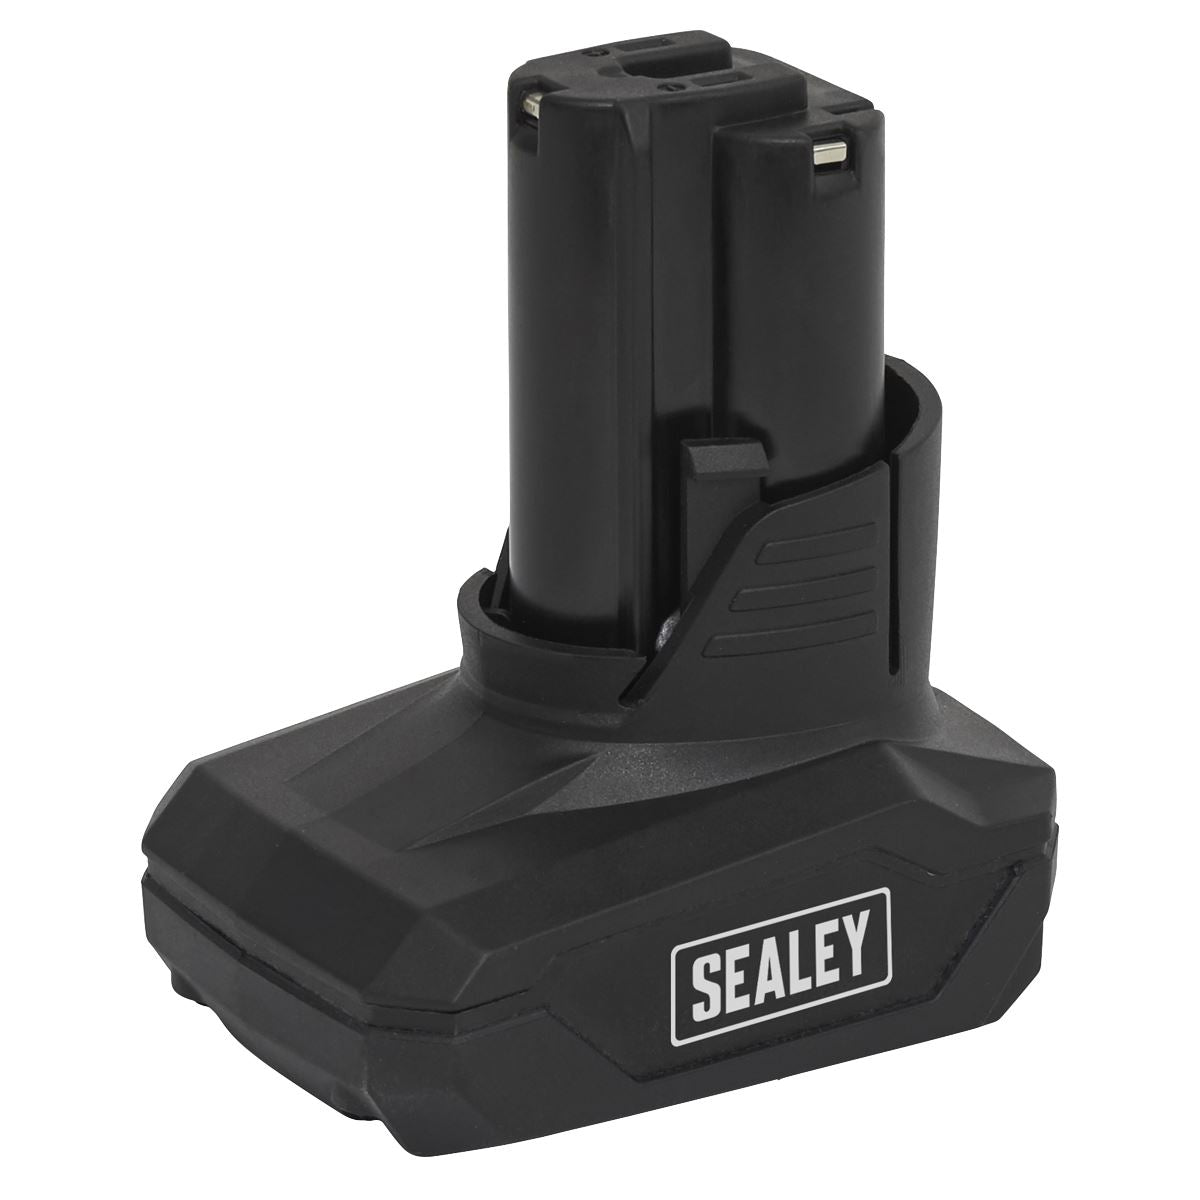 Sealey Ratchet Wrench Kit 3/8"Sq Drive 12V Lithium-ion - 3 Batteries